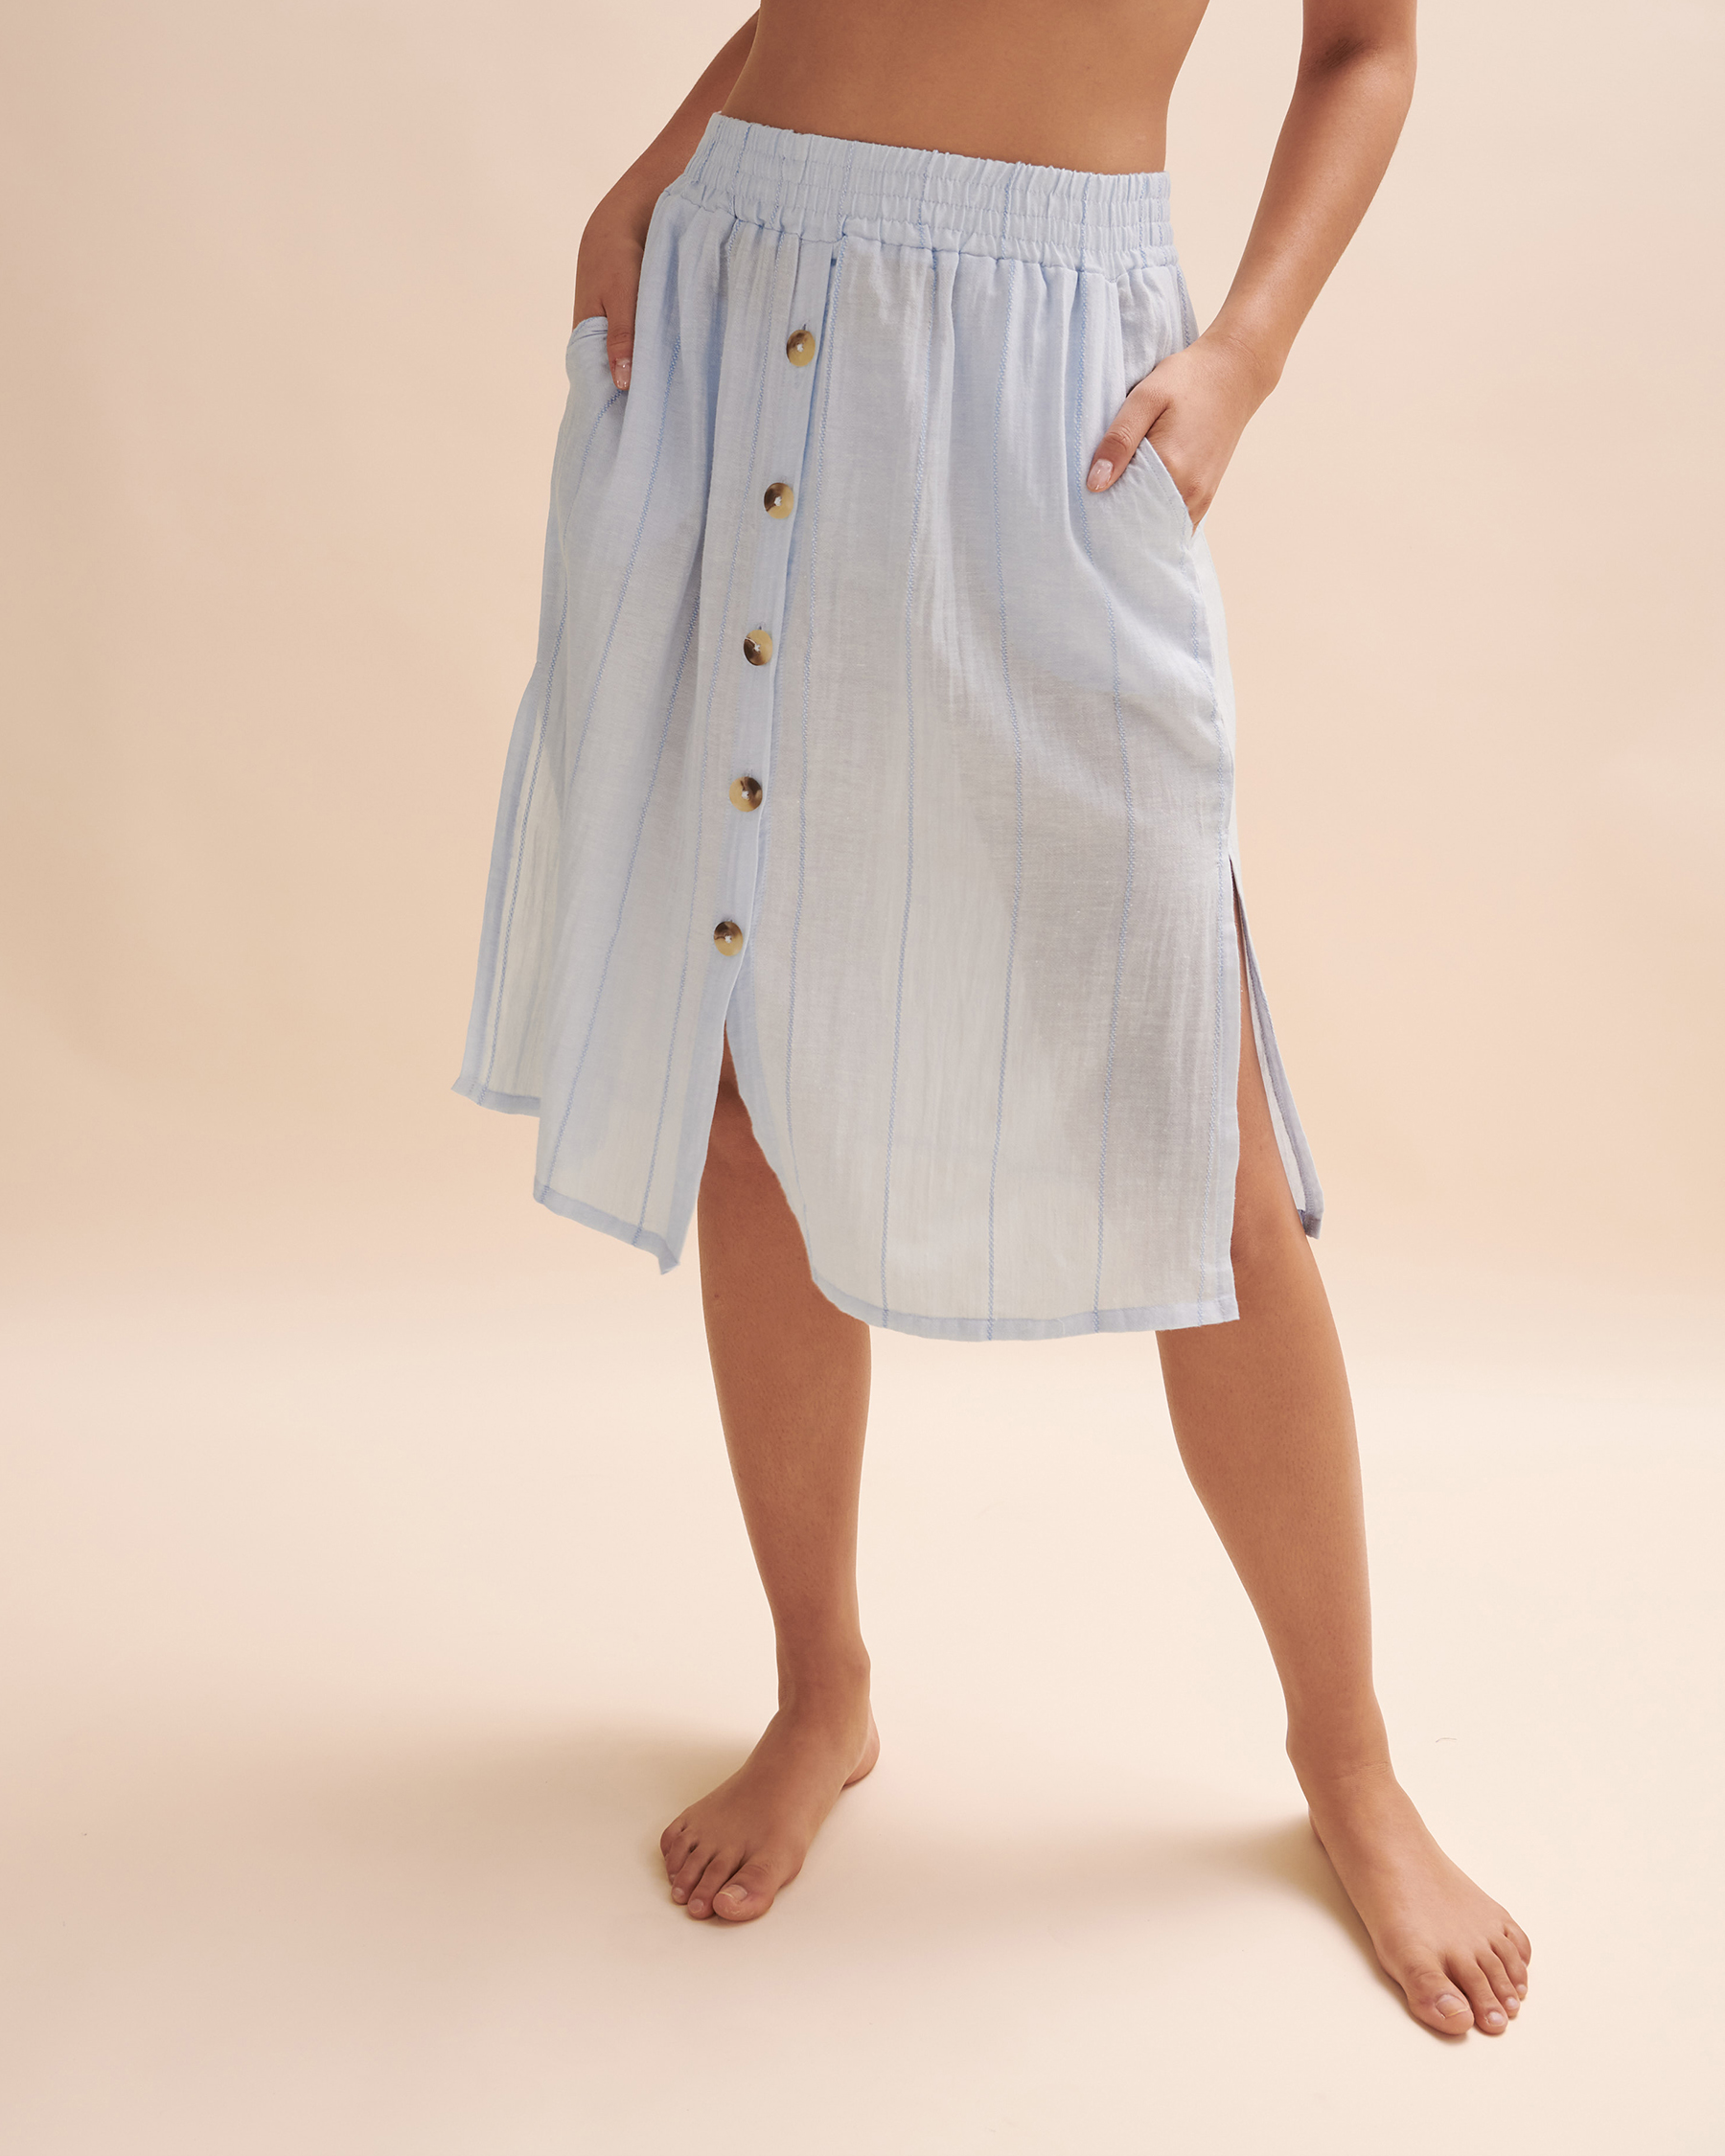 TROPIK Skirt with Buttons Wavy stripes 02200040 - View3